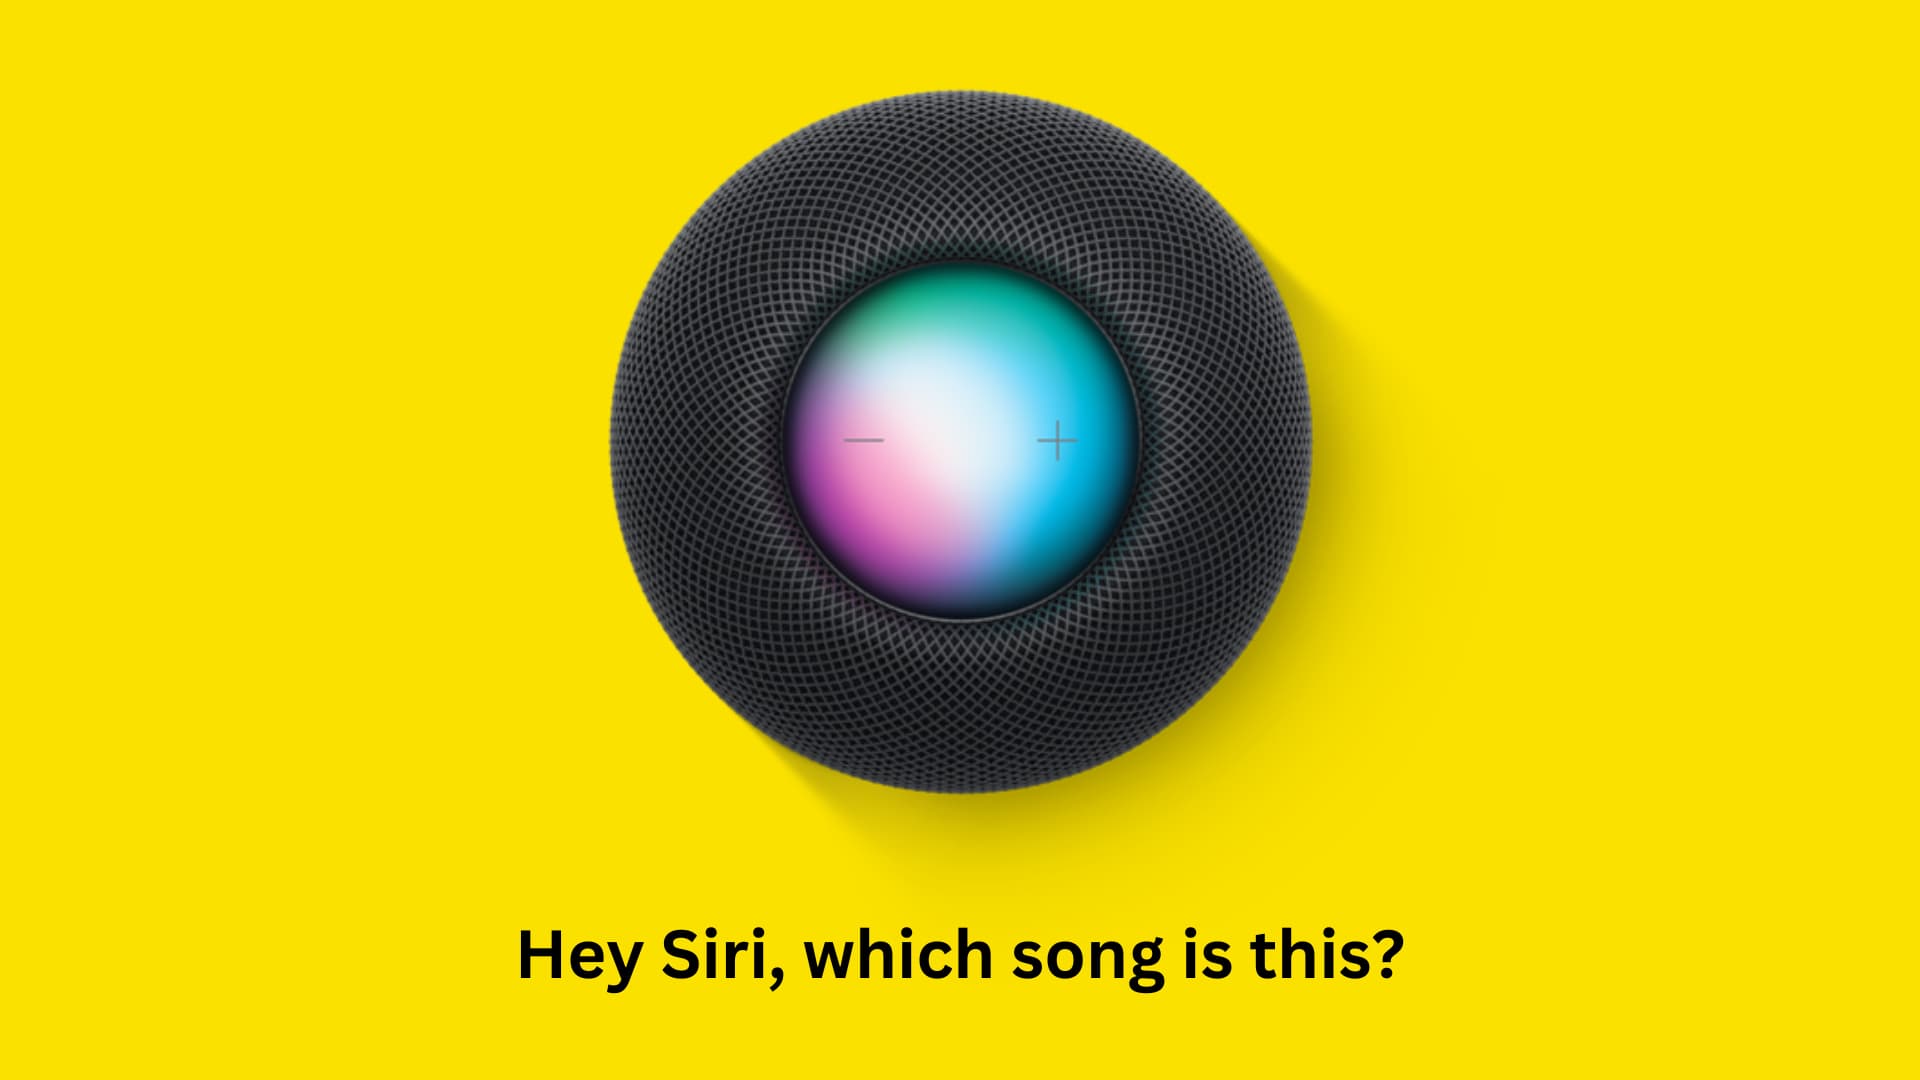 Ask Siri on HomePod what song is playing